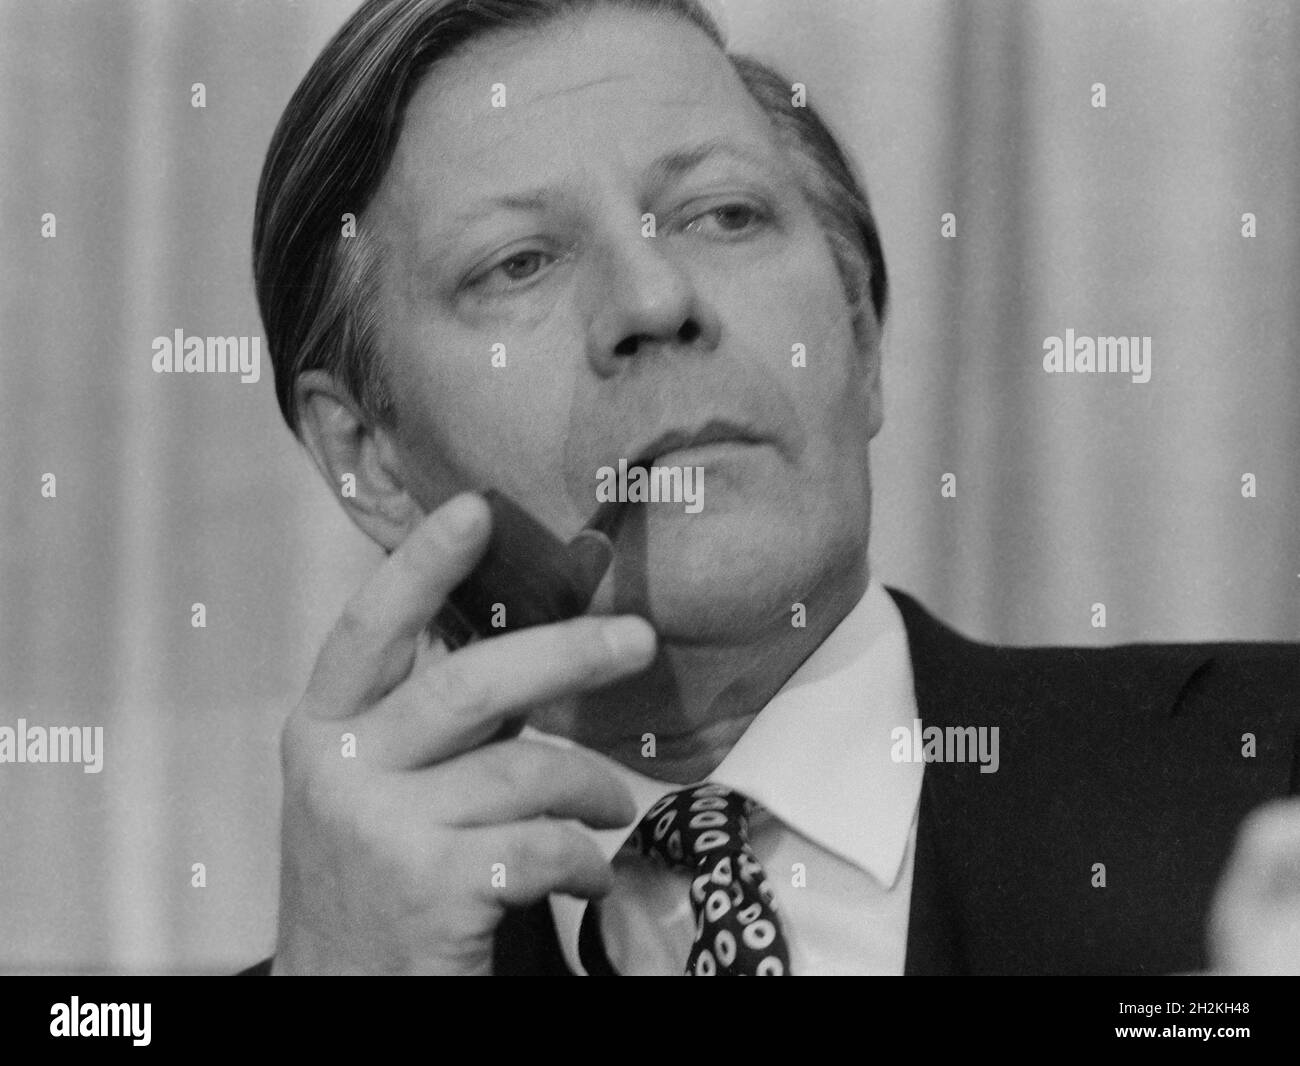 Helmut Schmidt, born 23 December 1918 is a German Social Democratic politician who served as Chancellor of West Germany from 1974 to 1982 - picture ta Stock Photo